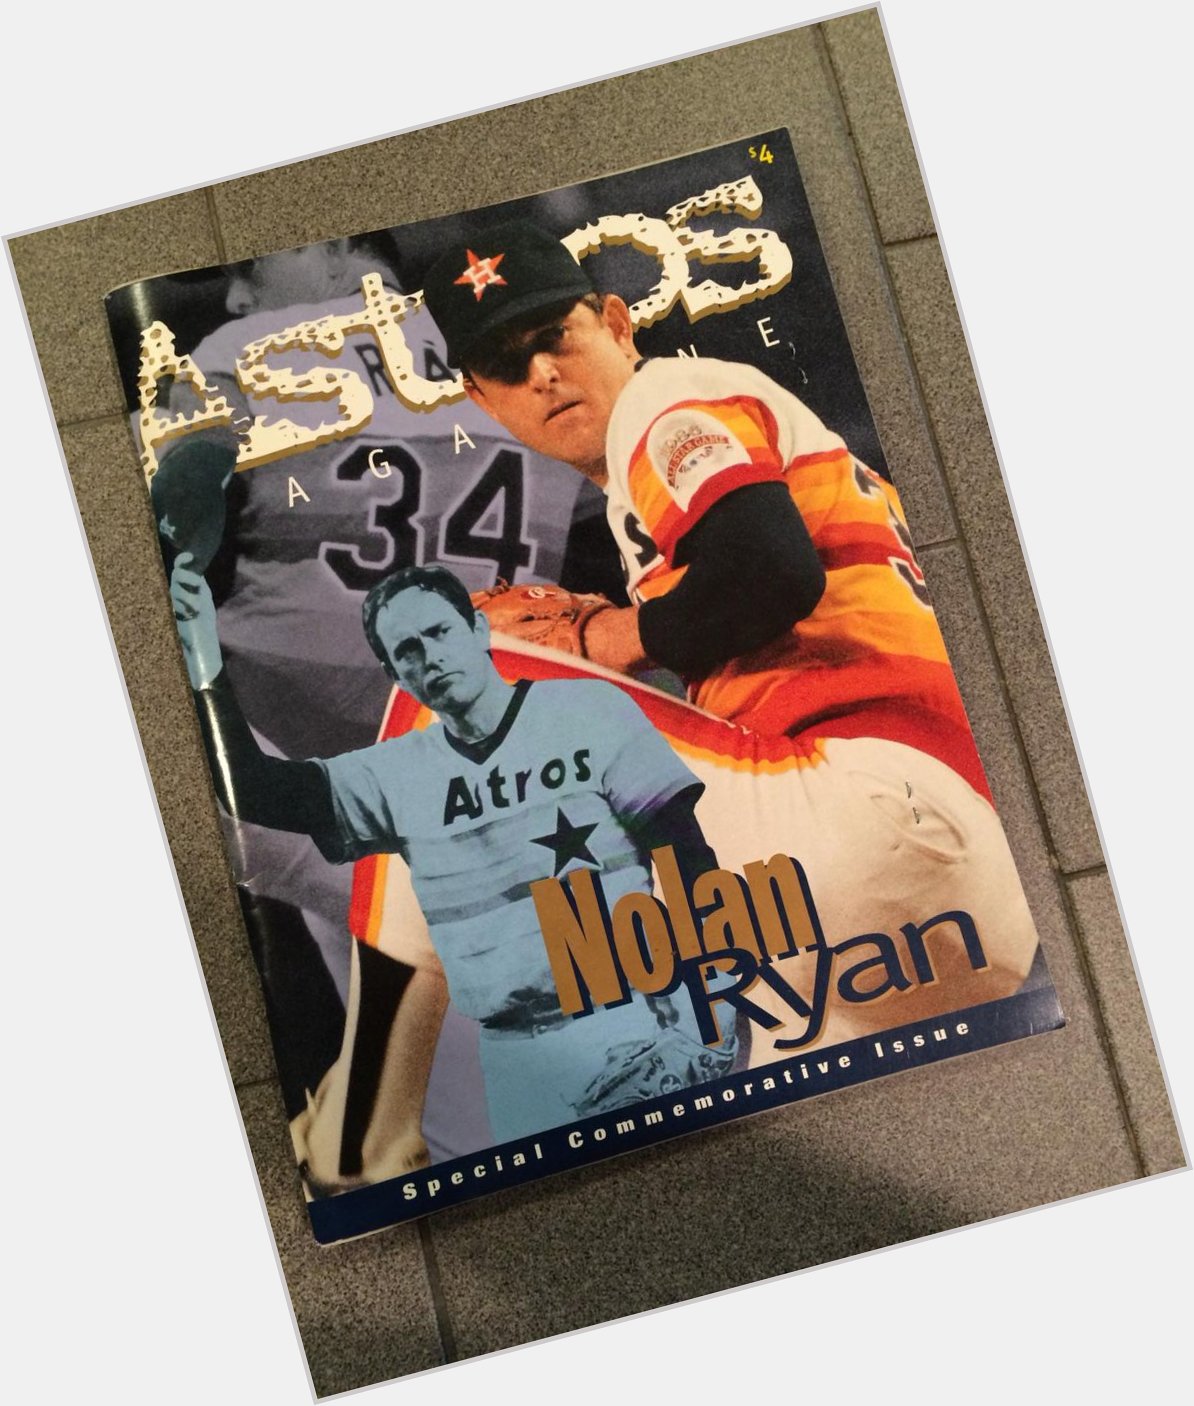 Happy Birthday to Nolan Ryan!!! One of the greatest of all time 